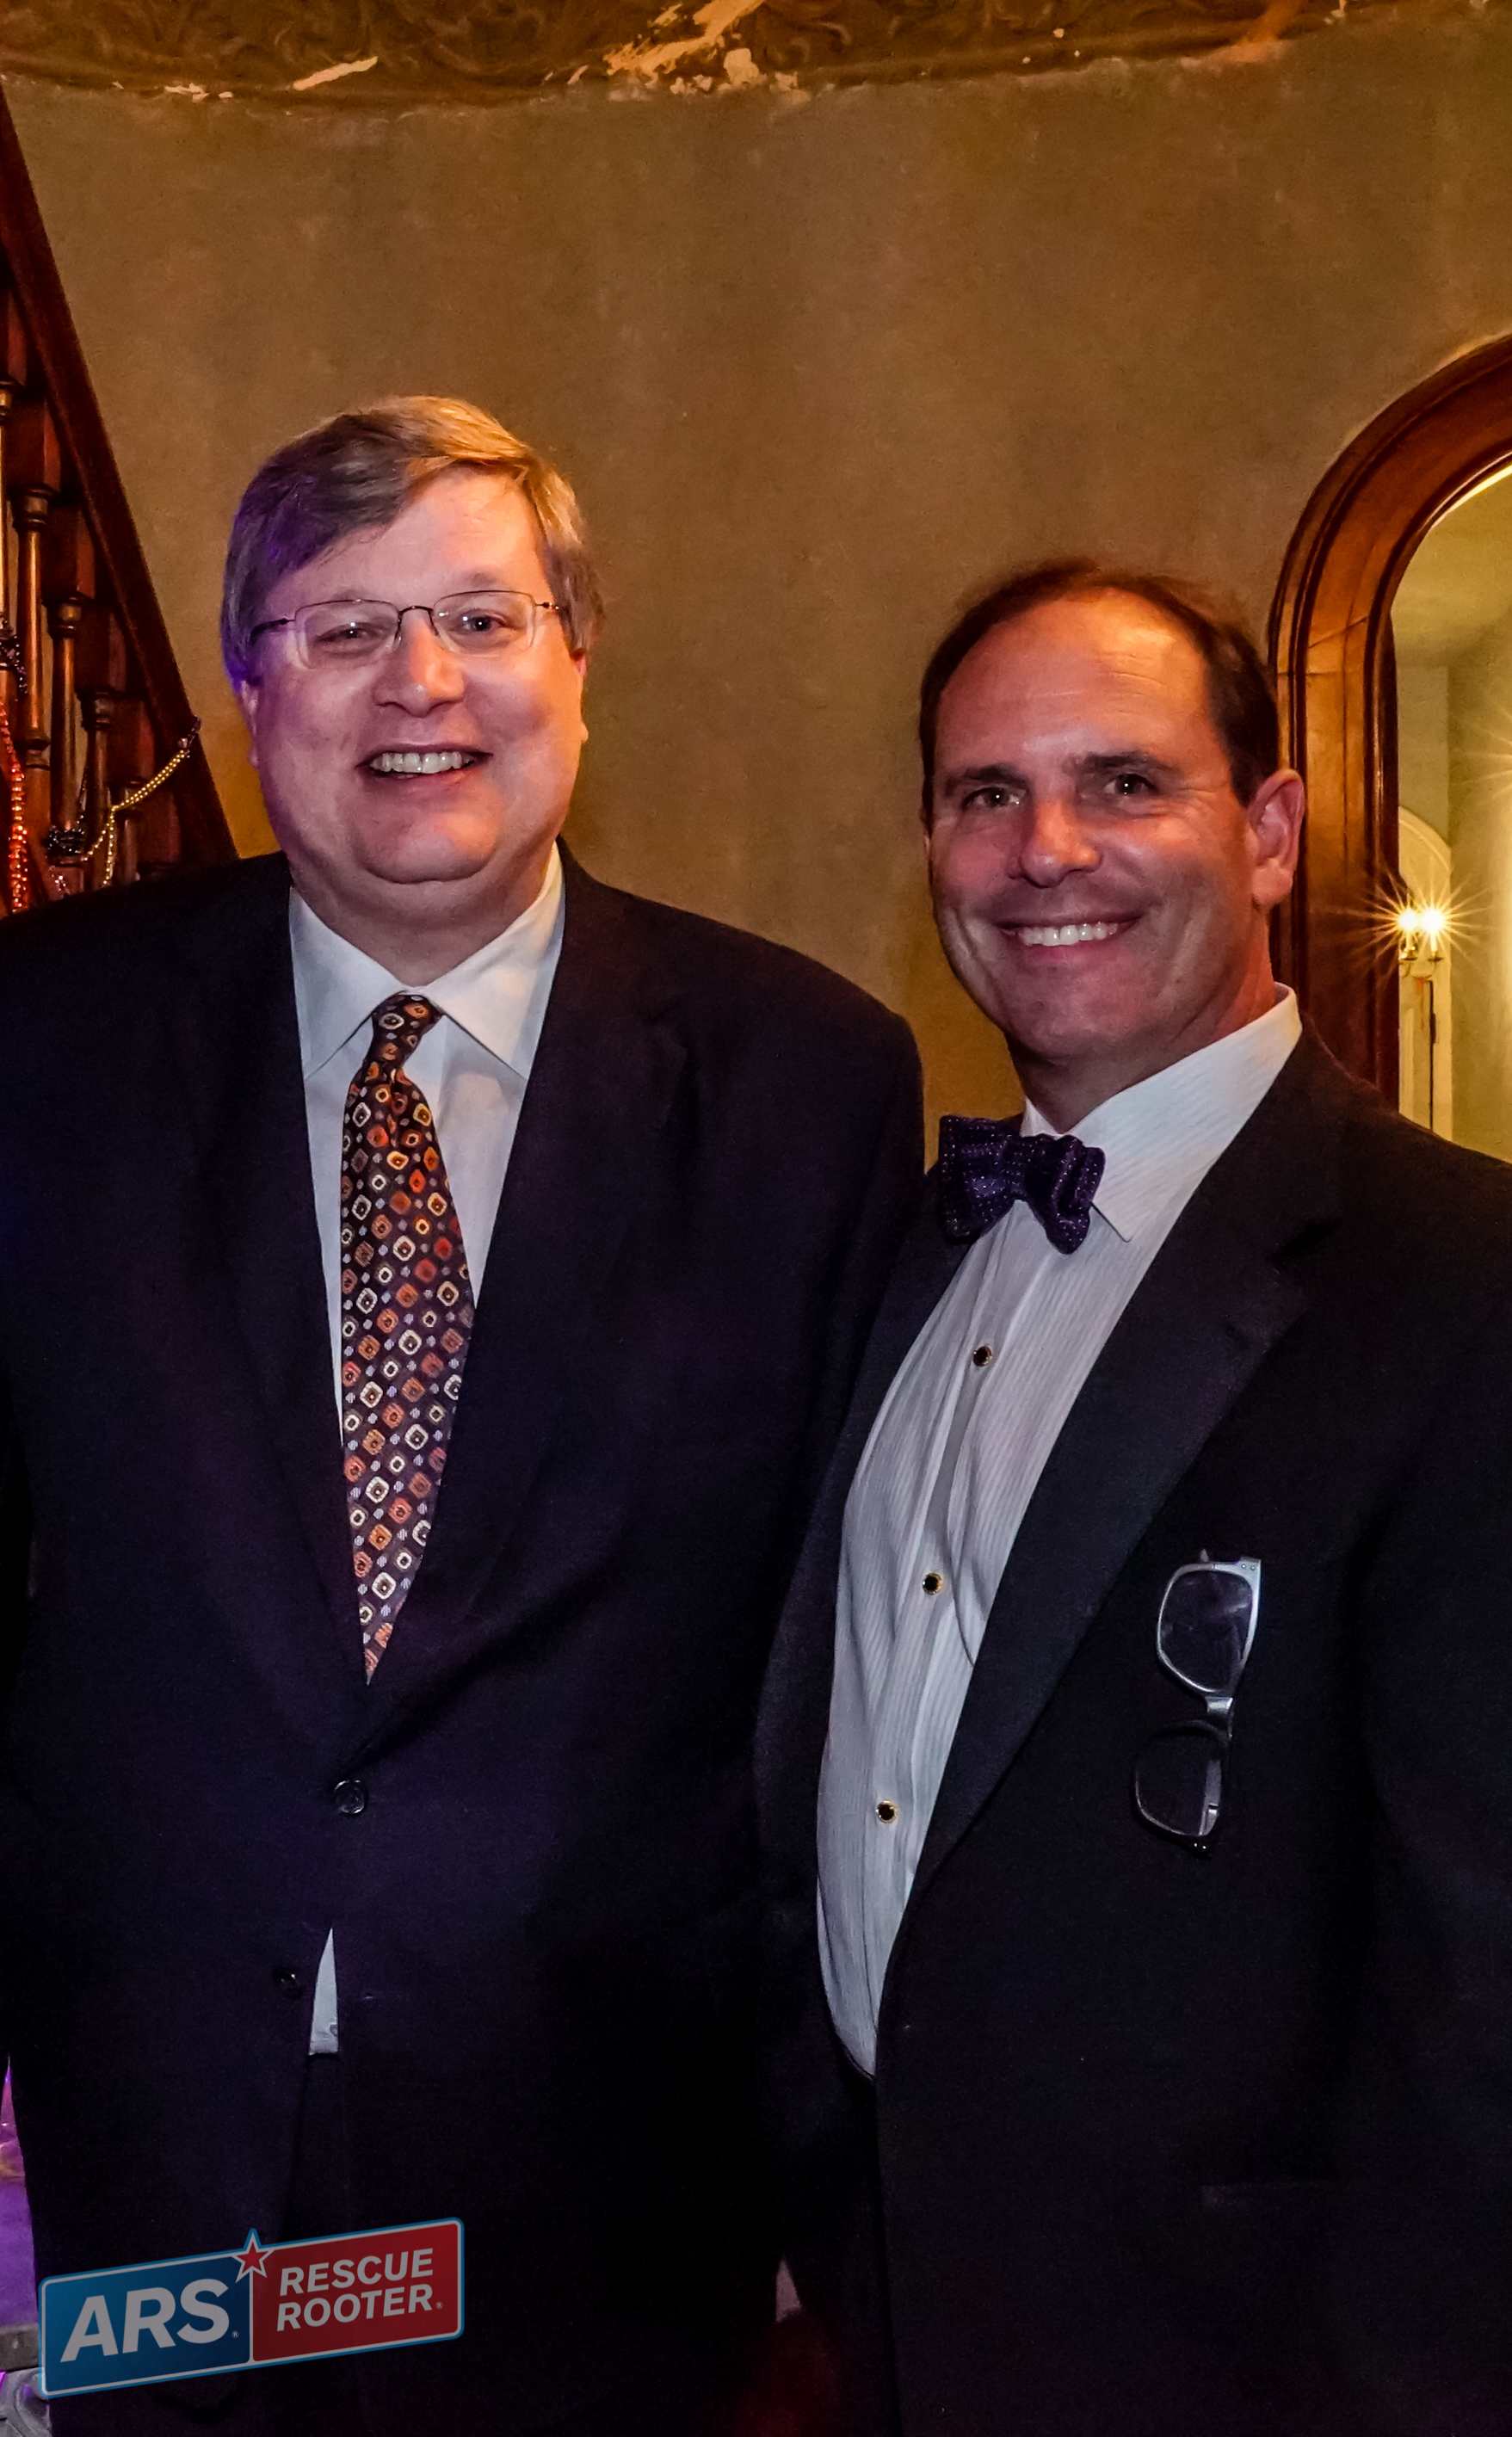 Memphis Mayor Jim Strickland with ARS/Rescue Rooter Co-CEO Dave Slott